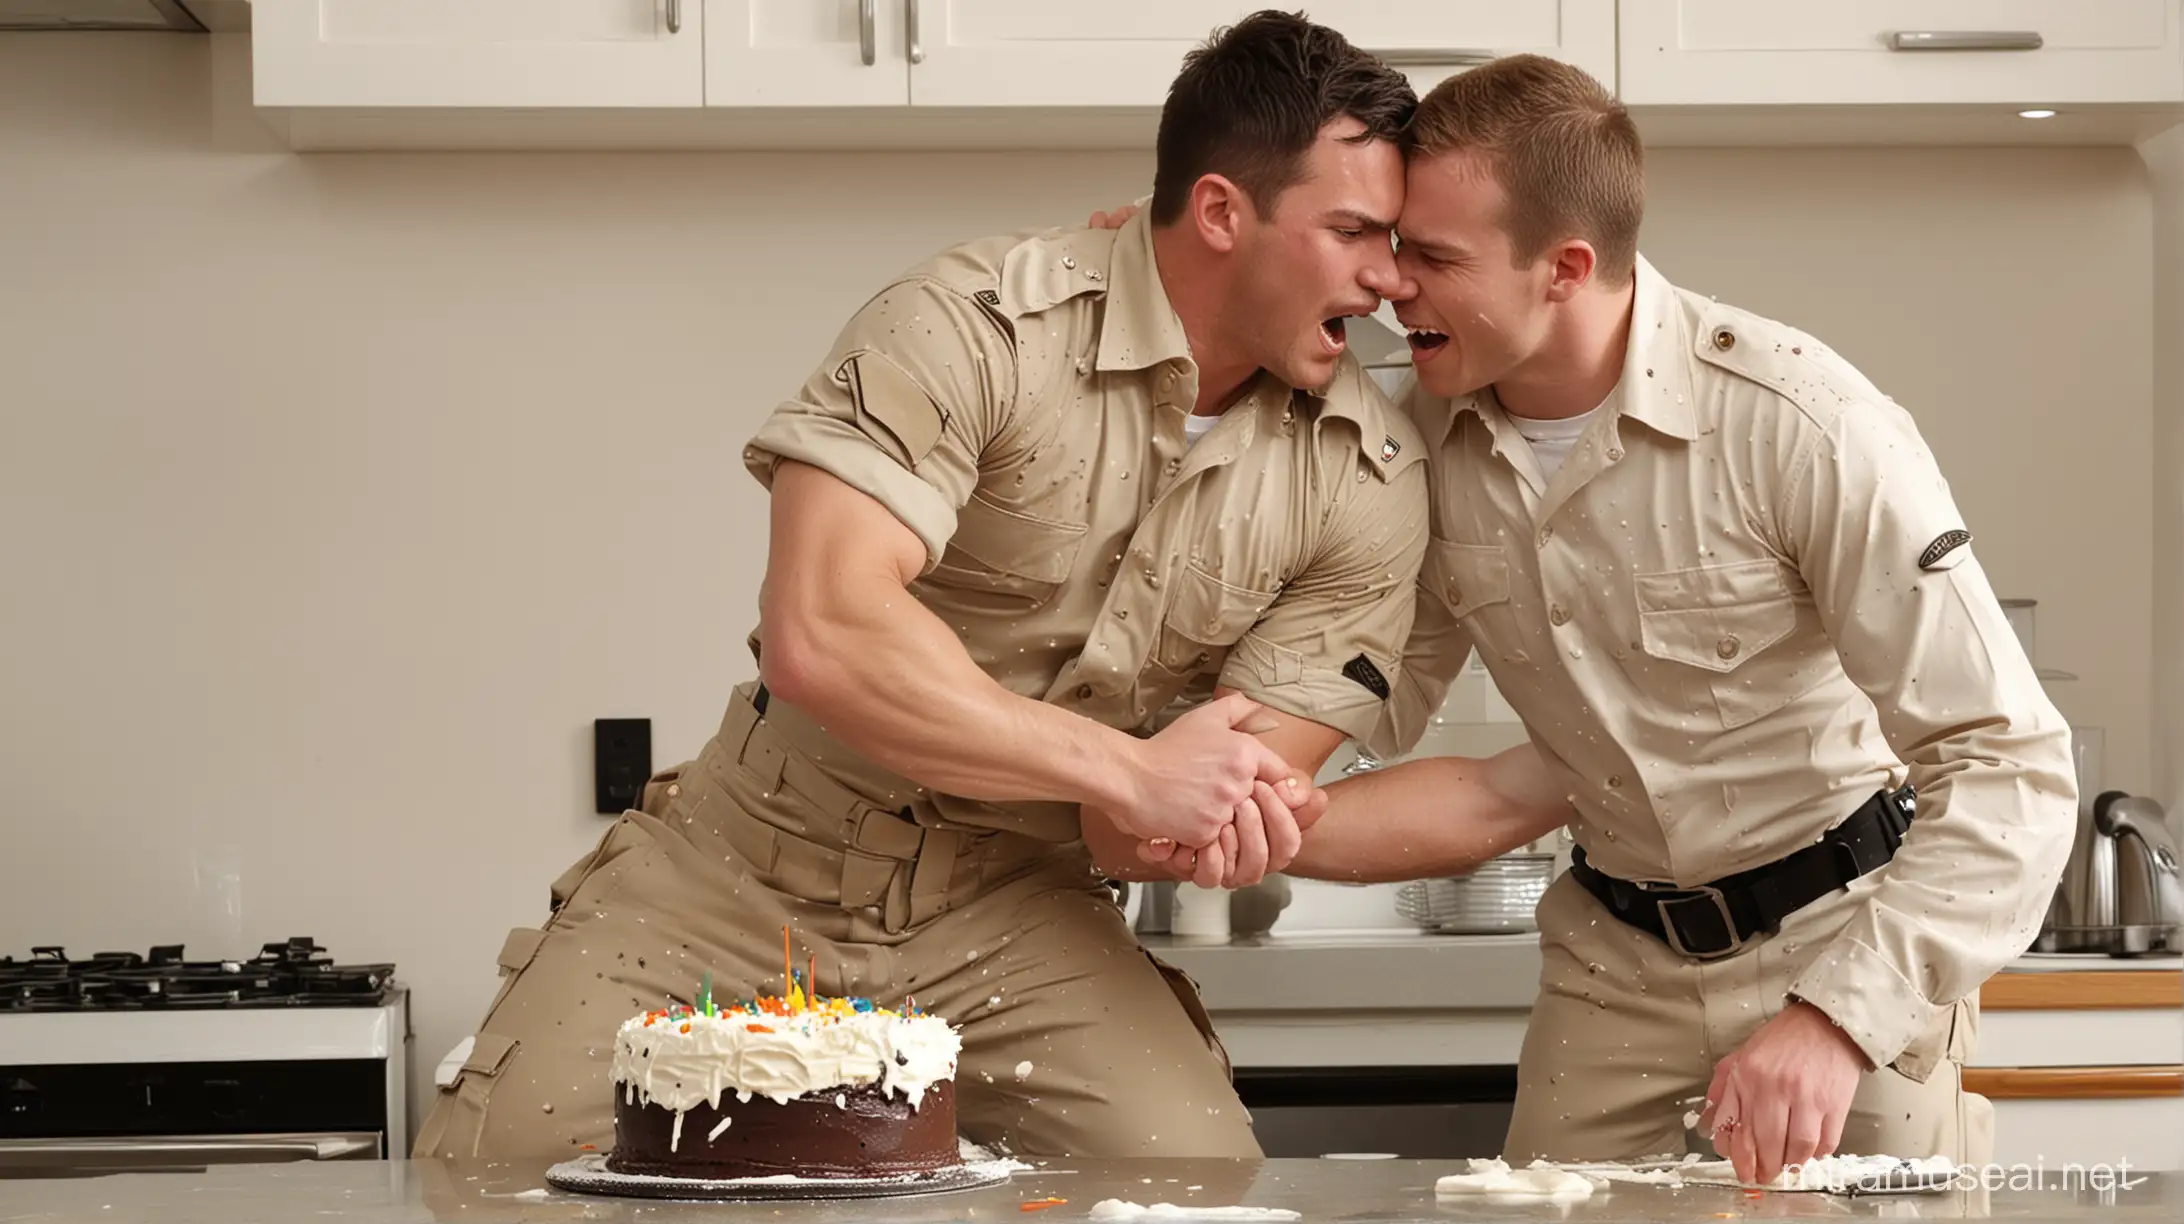 two uniformed white men soldier wrestling and fighting, gay, cake fighting, body crushes the cake, the ass crushes the cake, in kitchen, impacts cake, hits cake, cake in ruin, face in cake, atractive face, wet dirty, uniform covered in cake and cream, fighting and wrestling, fist fight, pressing your face into the cake and cream, trampling the cake, back on the cake, back pocket, sex and violence, 